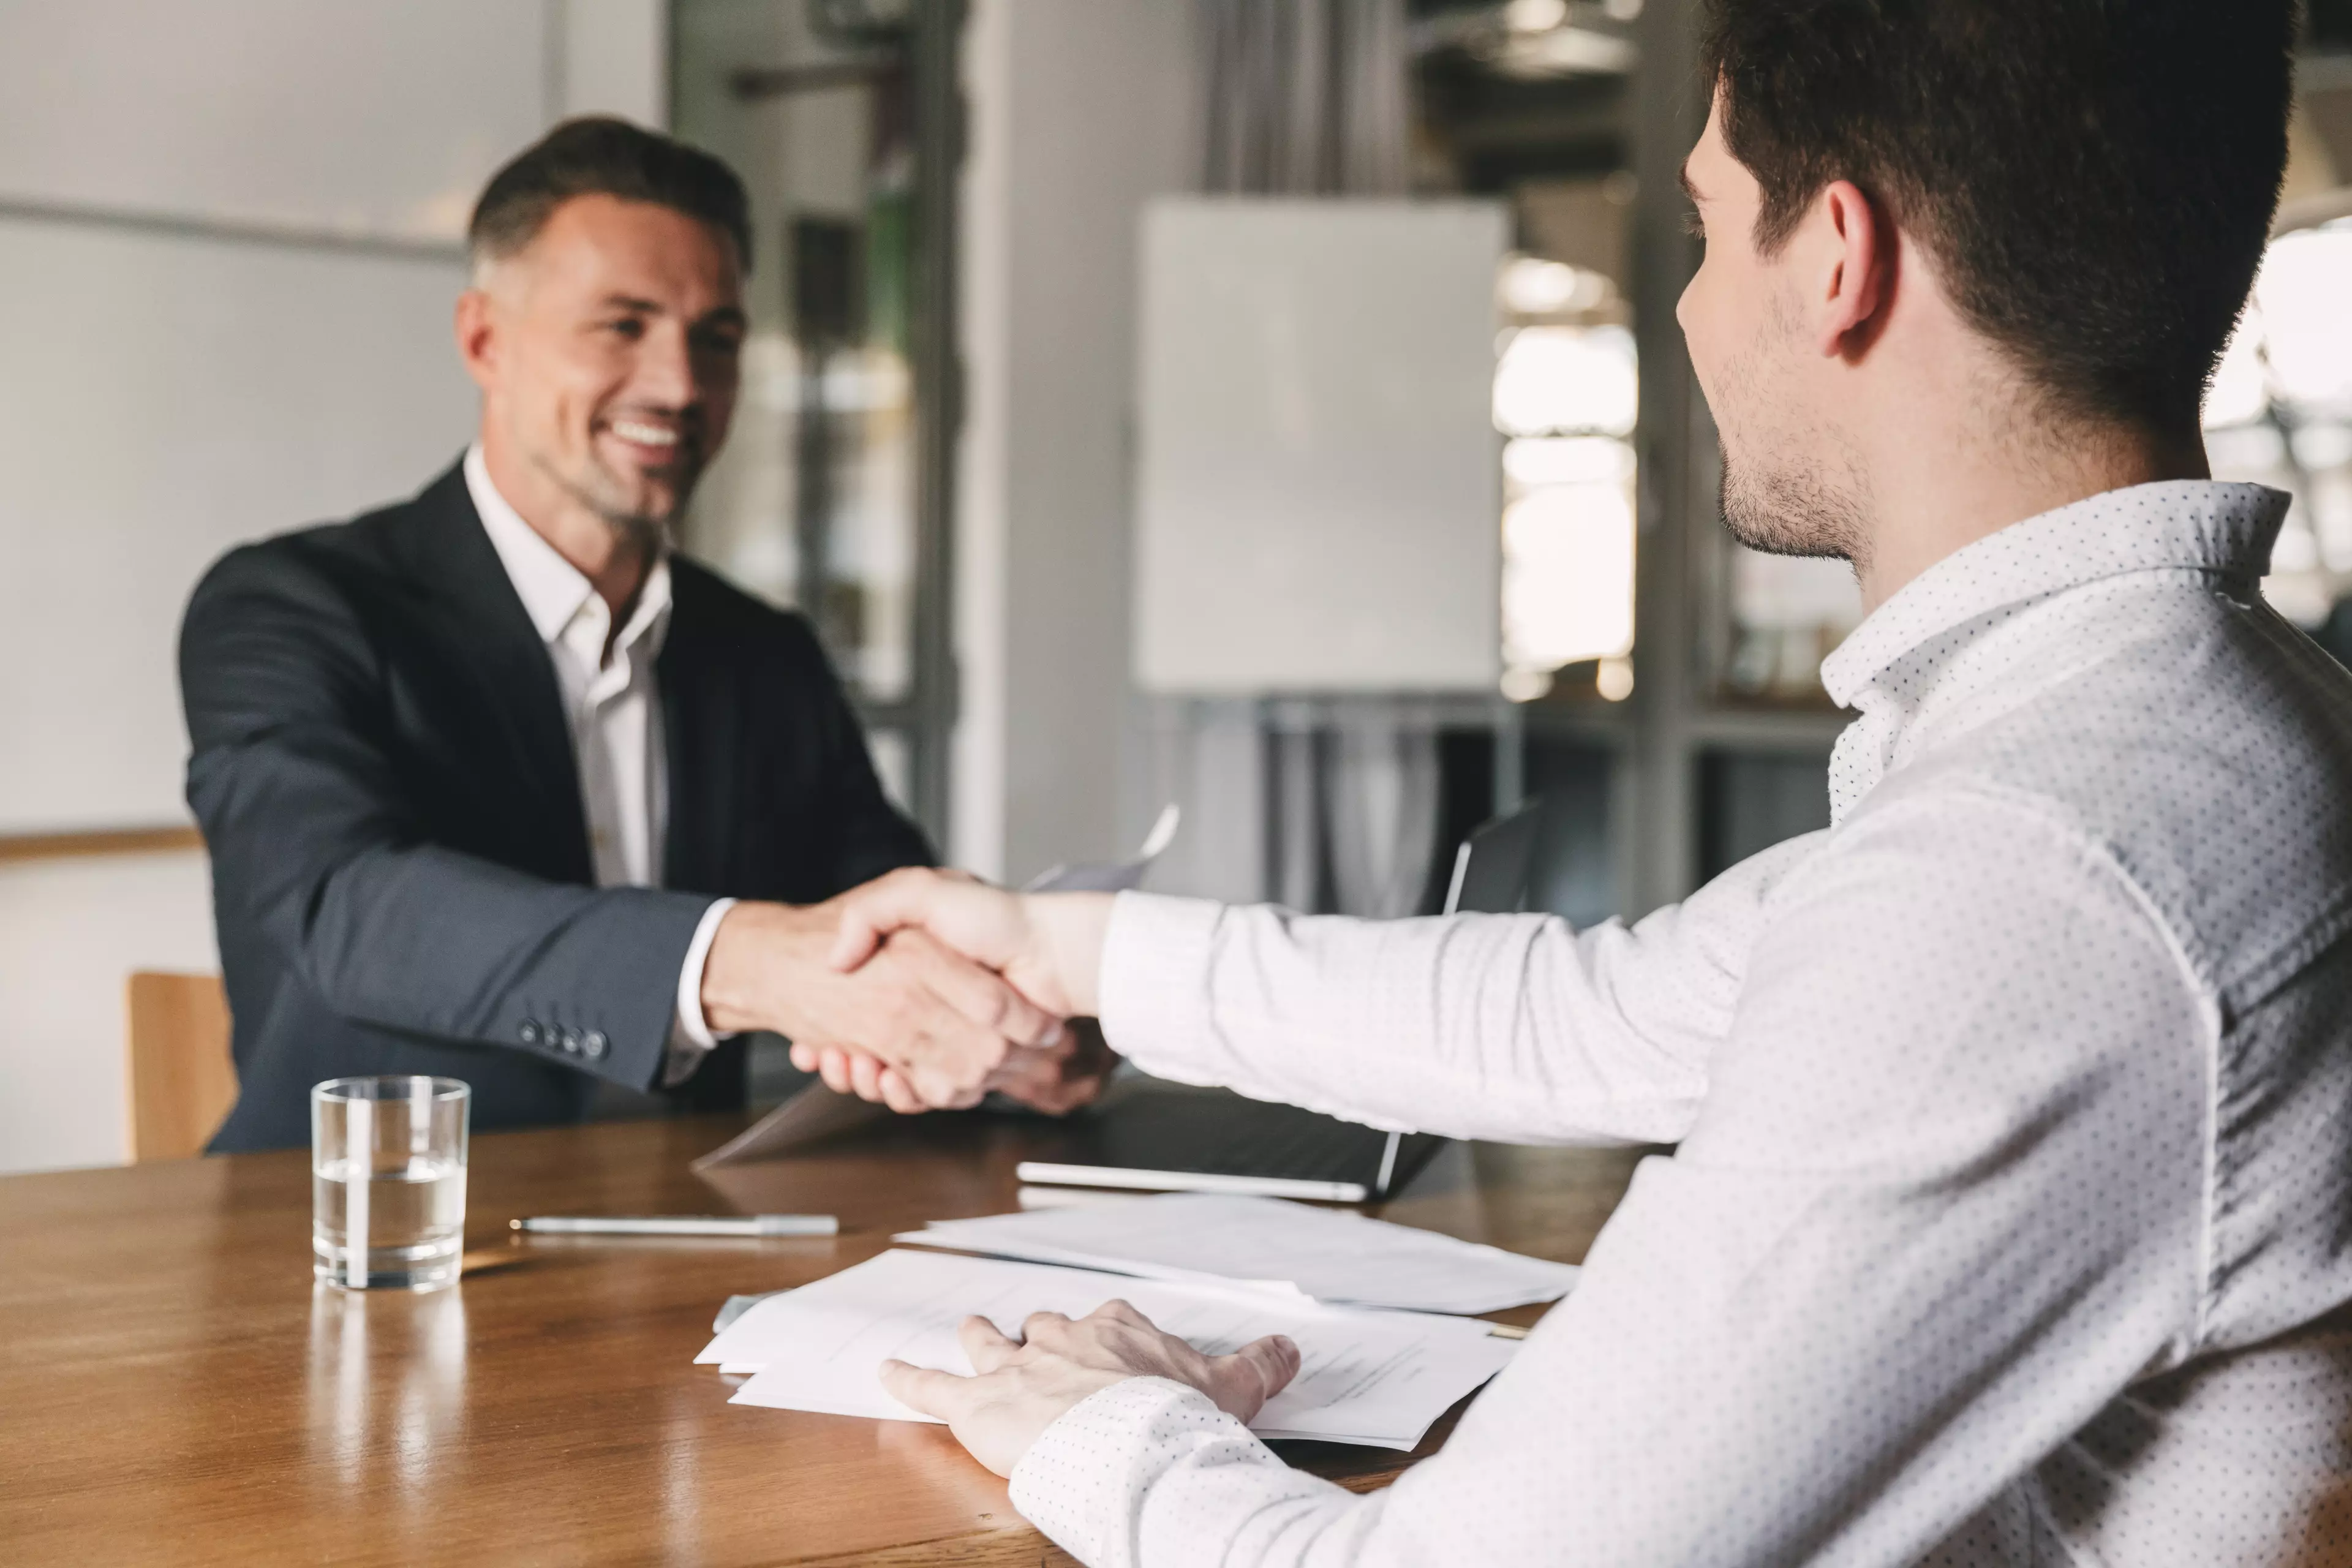 A recruiter and a job candidate sitting  facing each other at a desk, shaking hands.